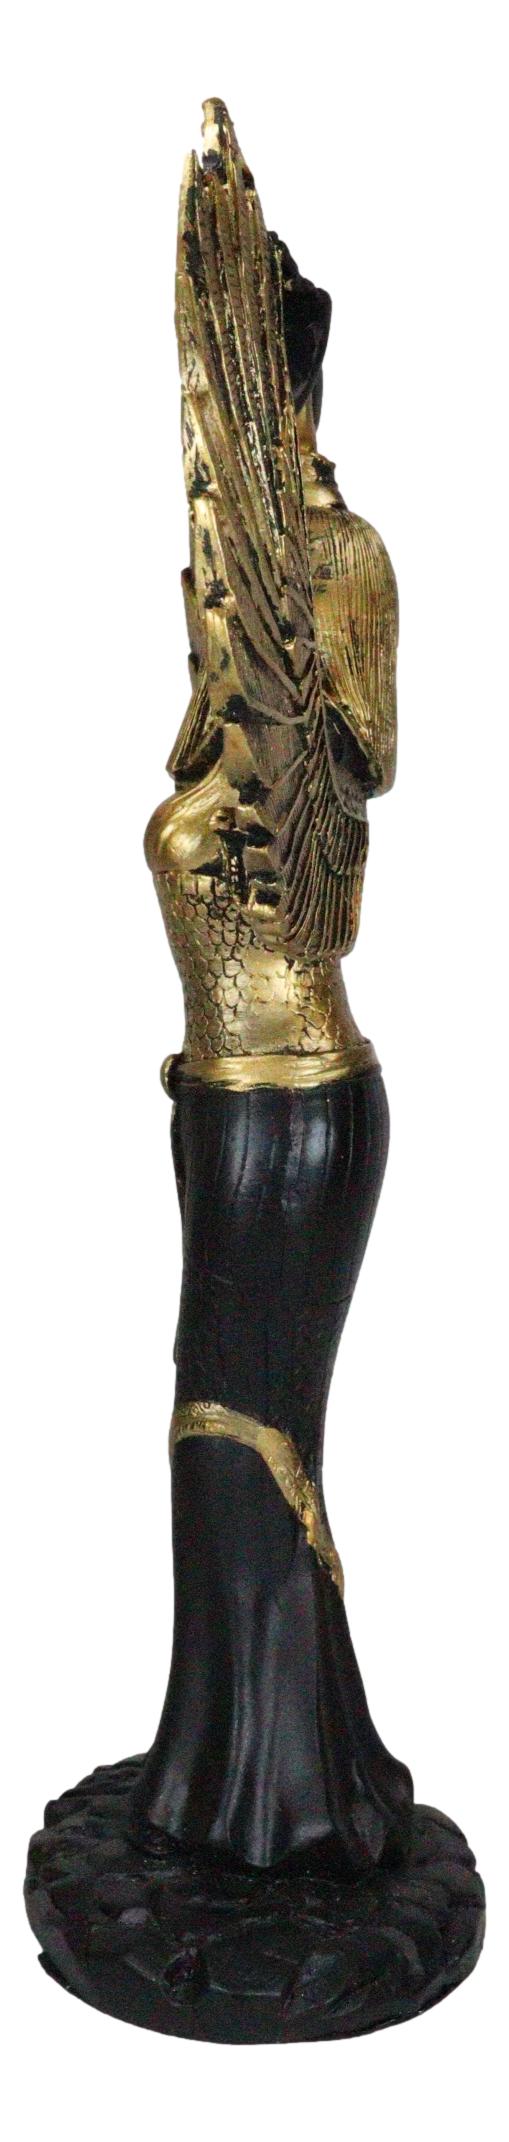 Ebros Egyptian Goddess Isis With Open Wings Statue Ancient Egypt Deity of Magic and Nature Iset Sculpture